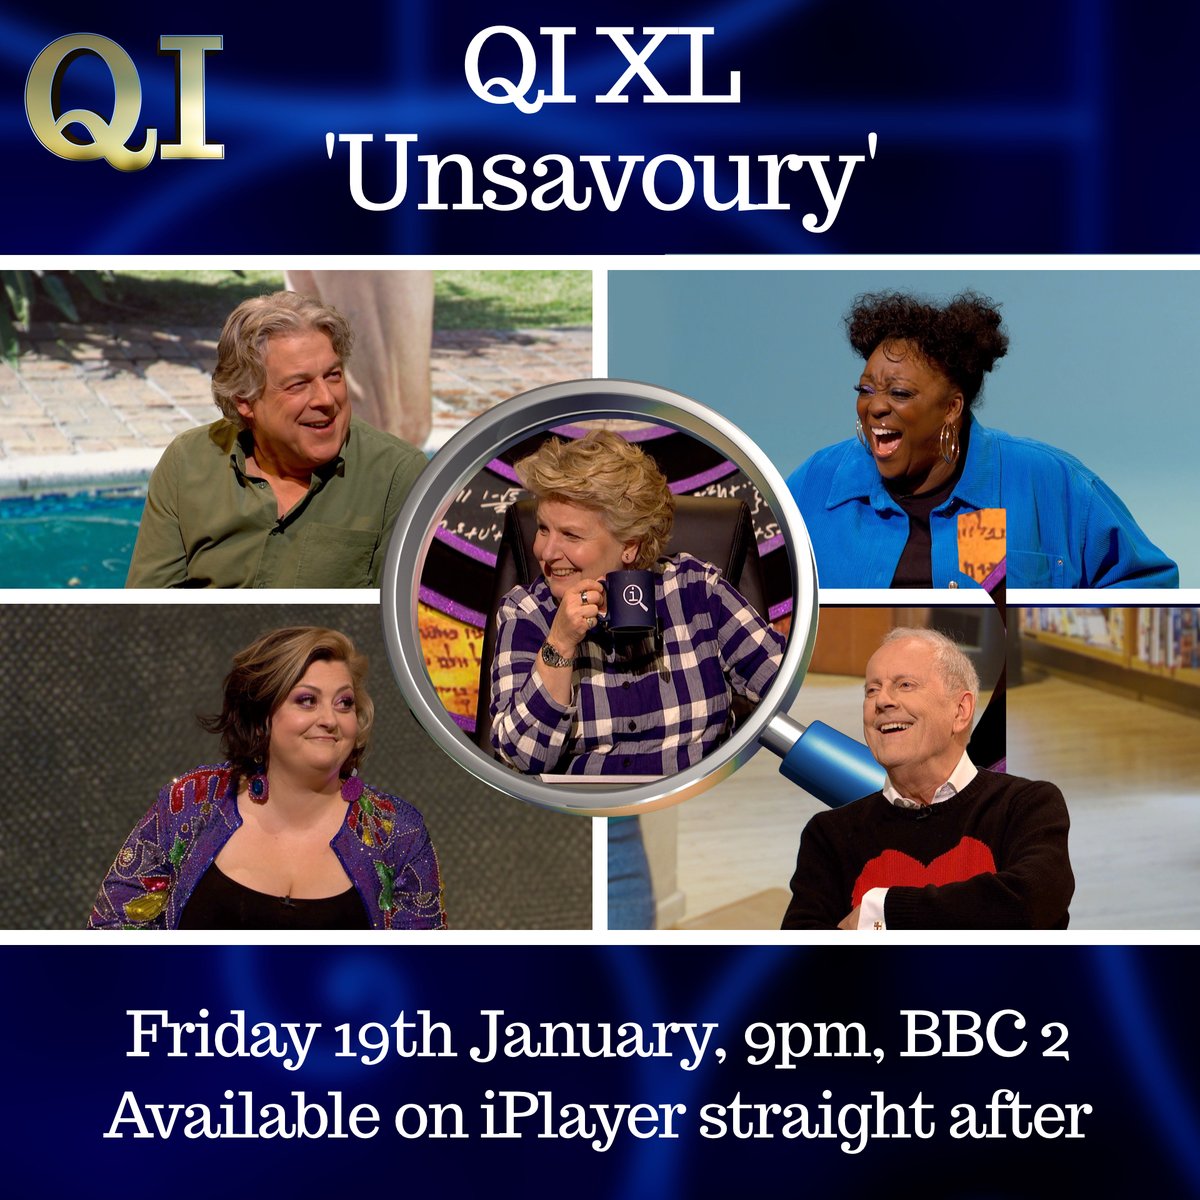 Tonight at 9pm on BBC Two there's a brand new episode of QI XL and the theme is UNSAVOURY! With Sandi, Alan, Gyles Brandreth, Kiri Pritchard-McLean and Judi Love.